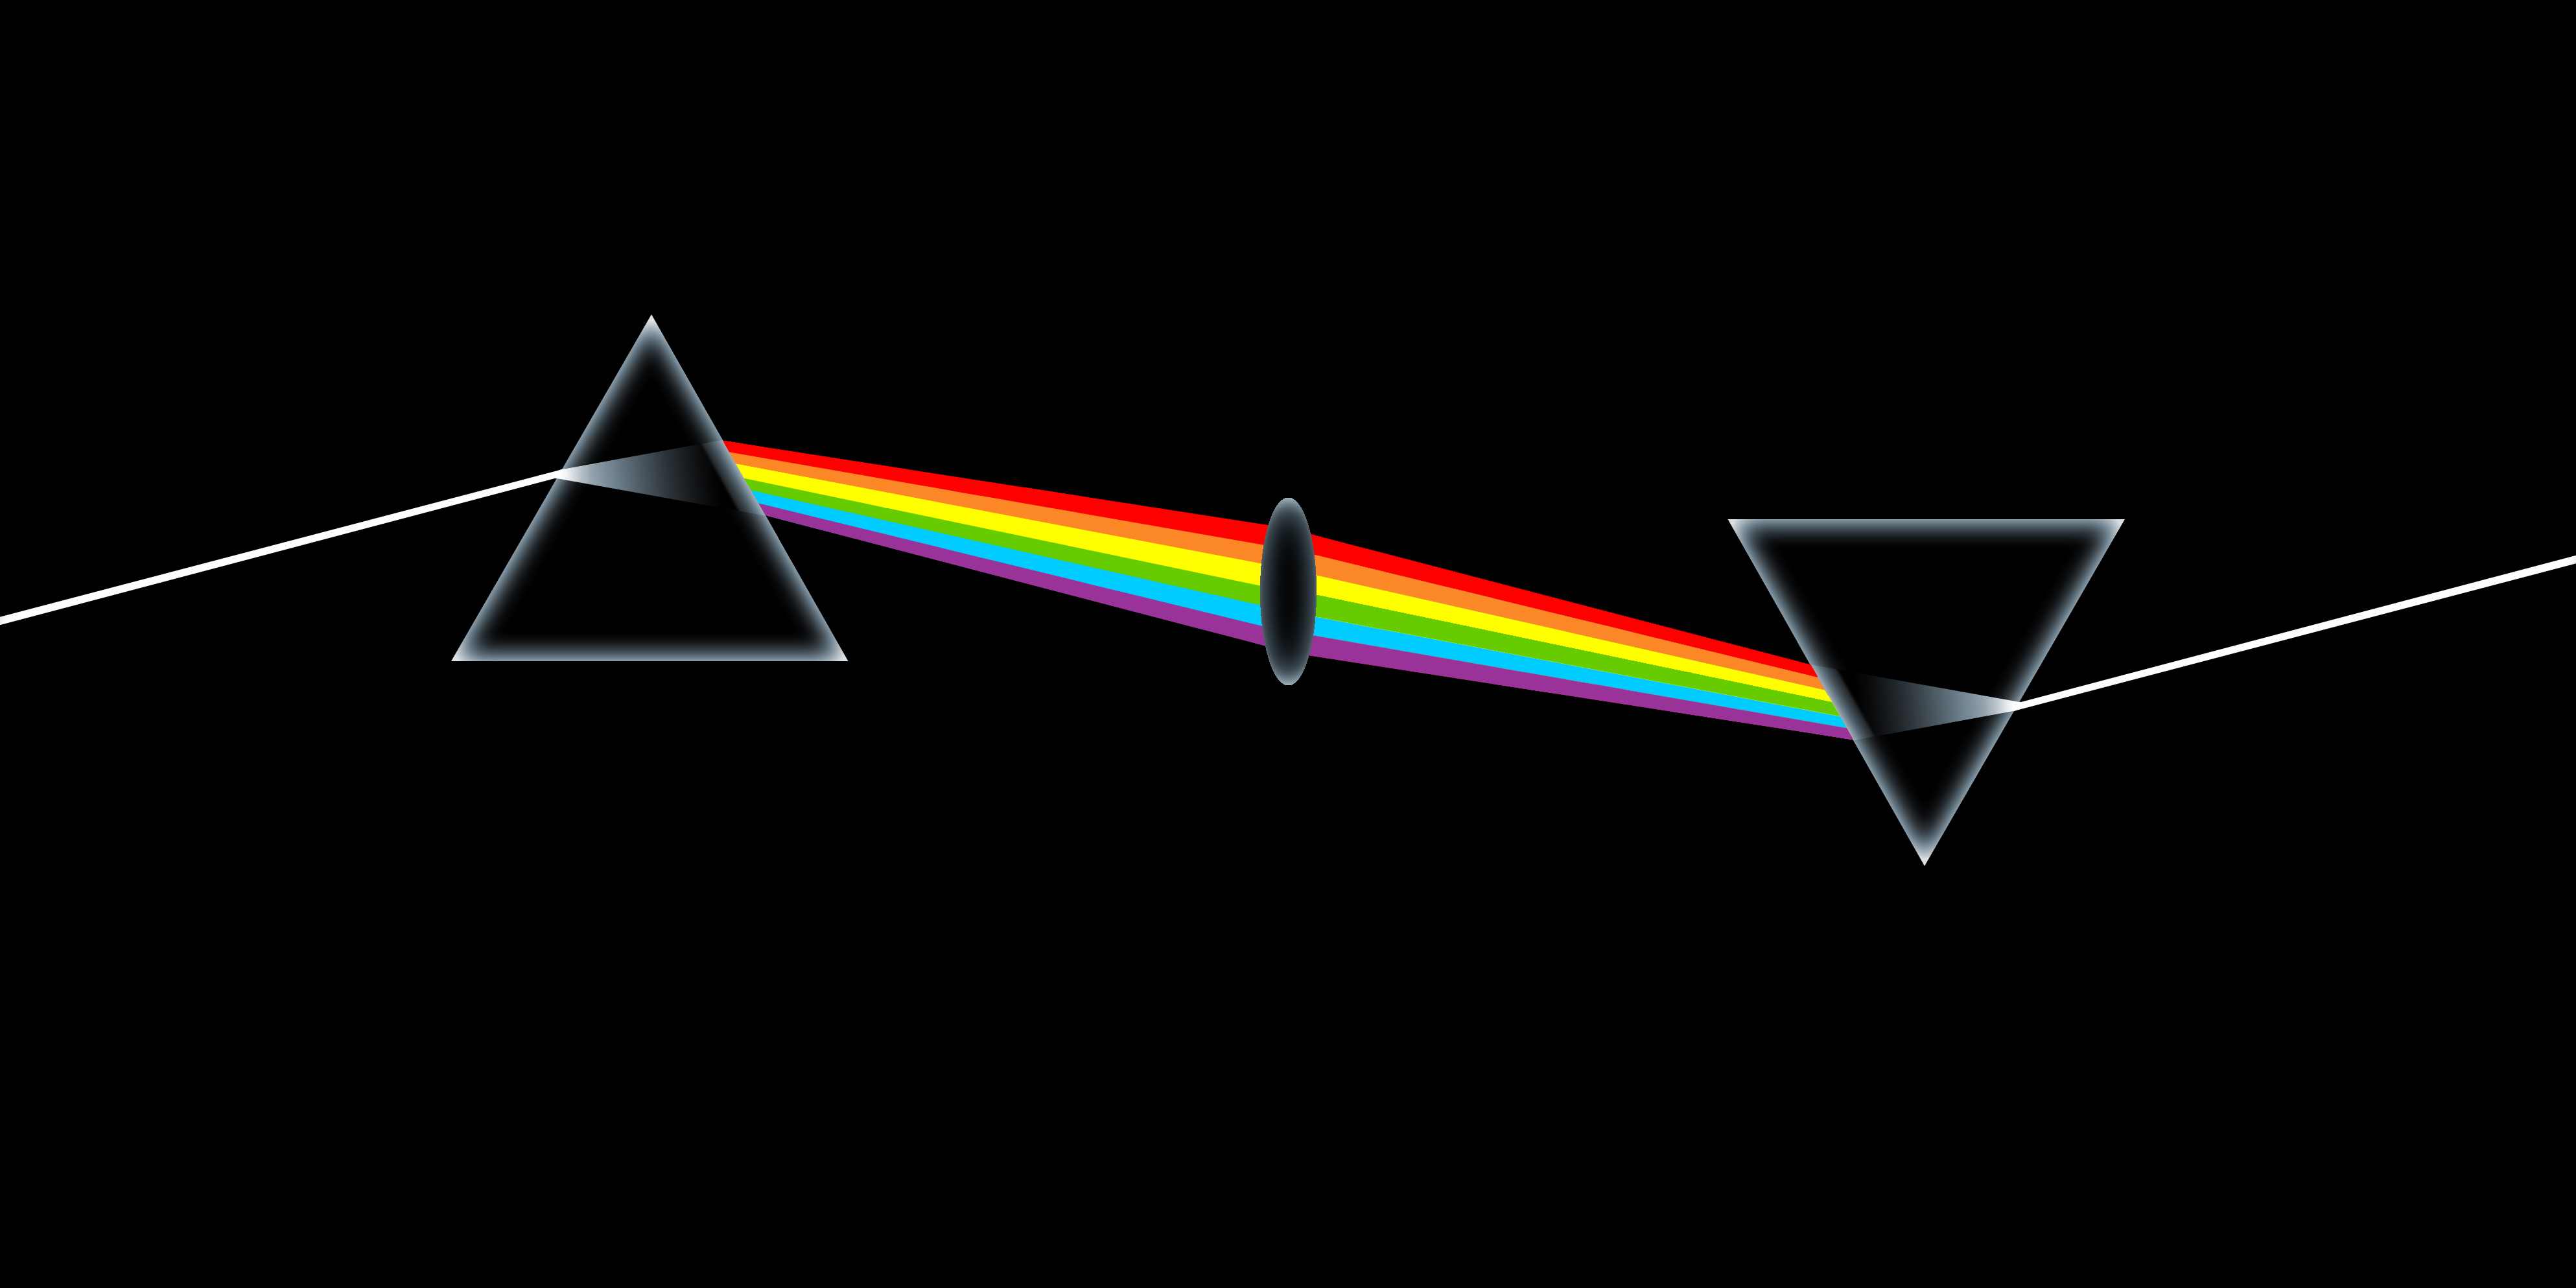 Wallpaper Pink Floyd Darkness Art The Dark Side of The Moon Fictional  Character Background  Download Free Image